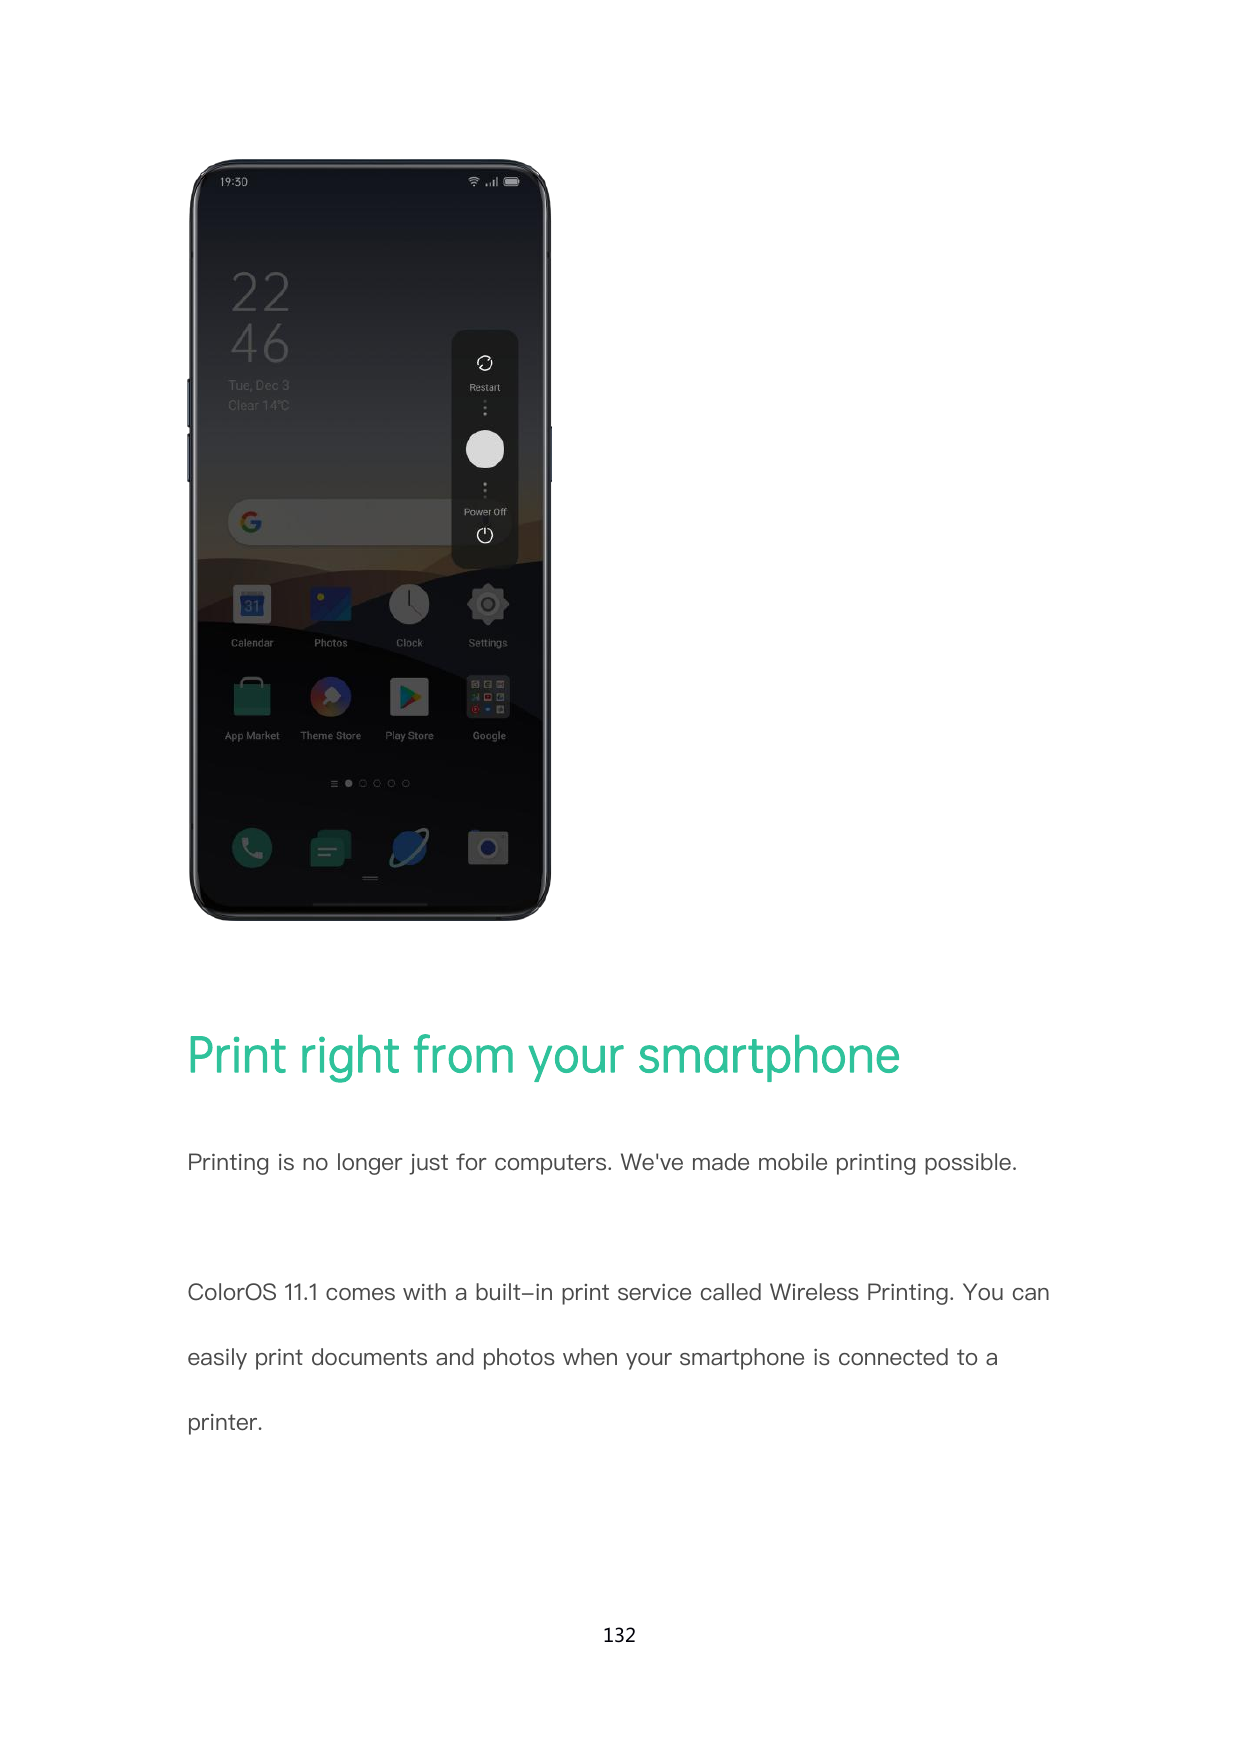 Print right from your smartphonePrinting is no longer just for computers. We've made mobile printing possible.ColorOS 11.1 comes